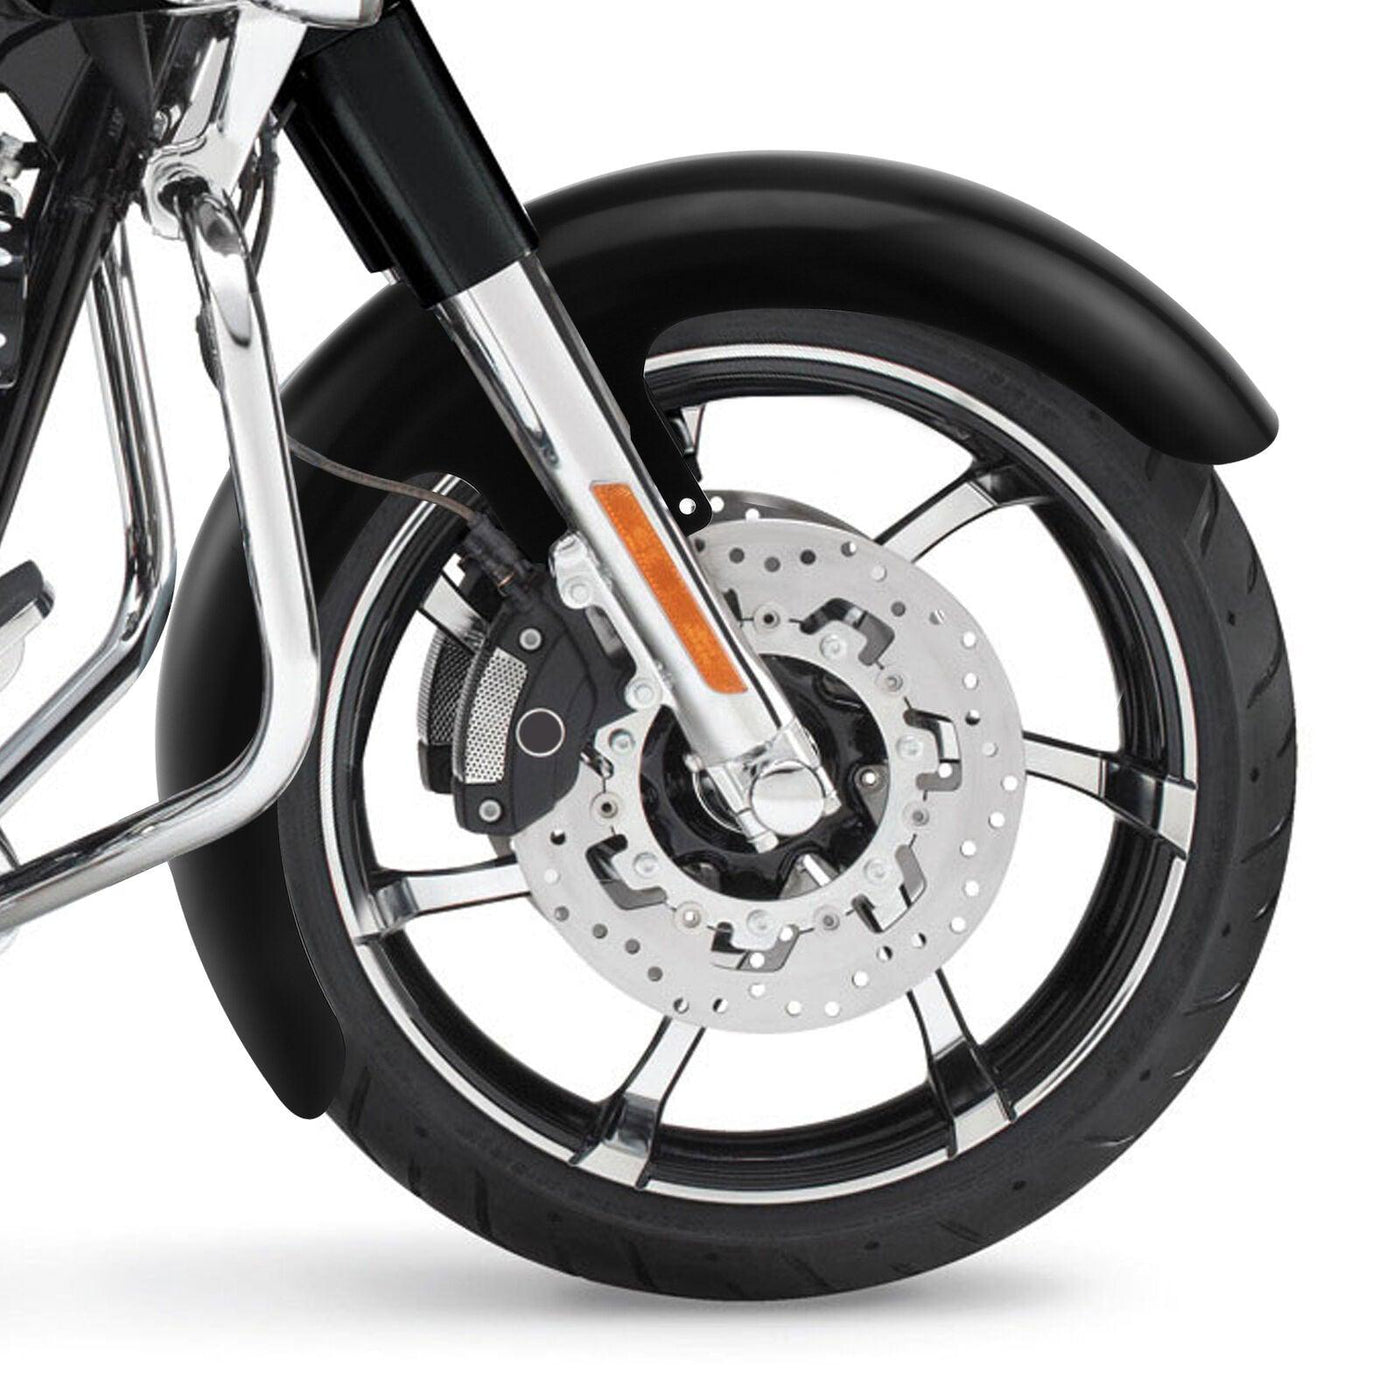 21" Wrap Front Fender Risers Spacer Mount Fit For Harley Street Road Glide 14-Up - Moto Life Products